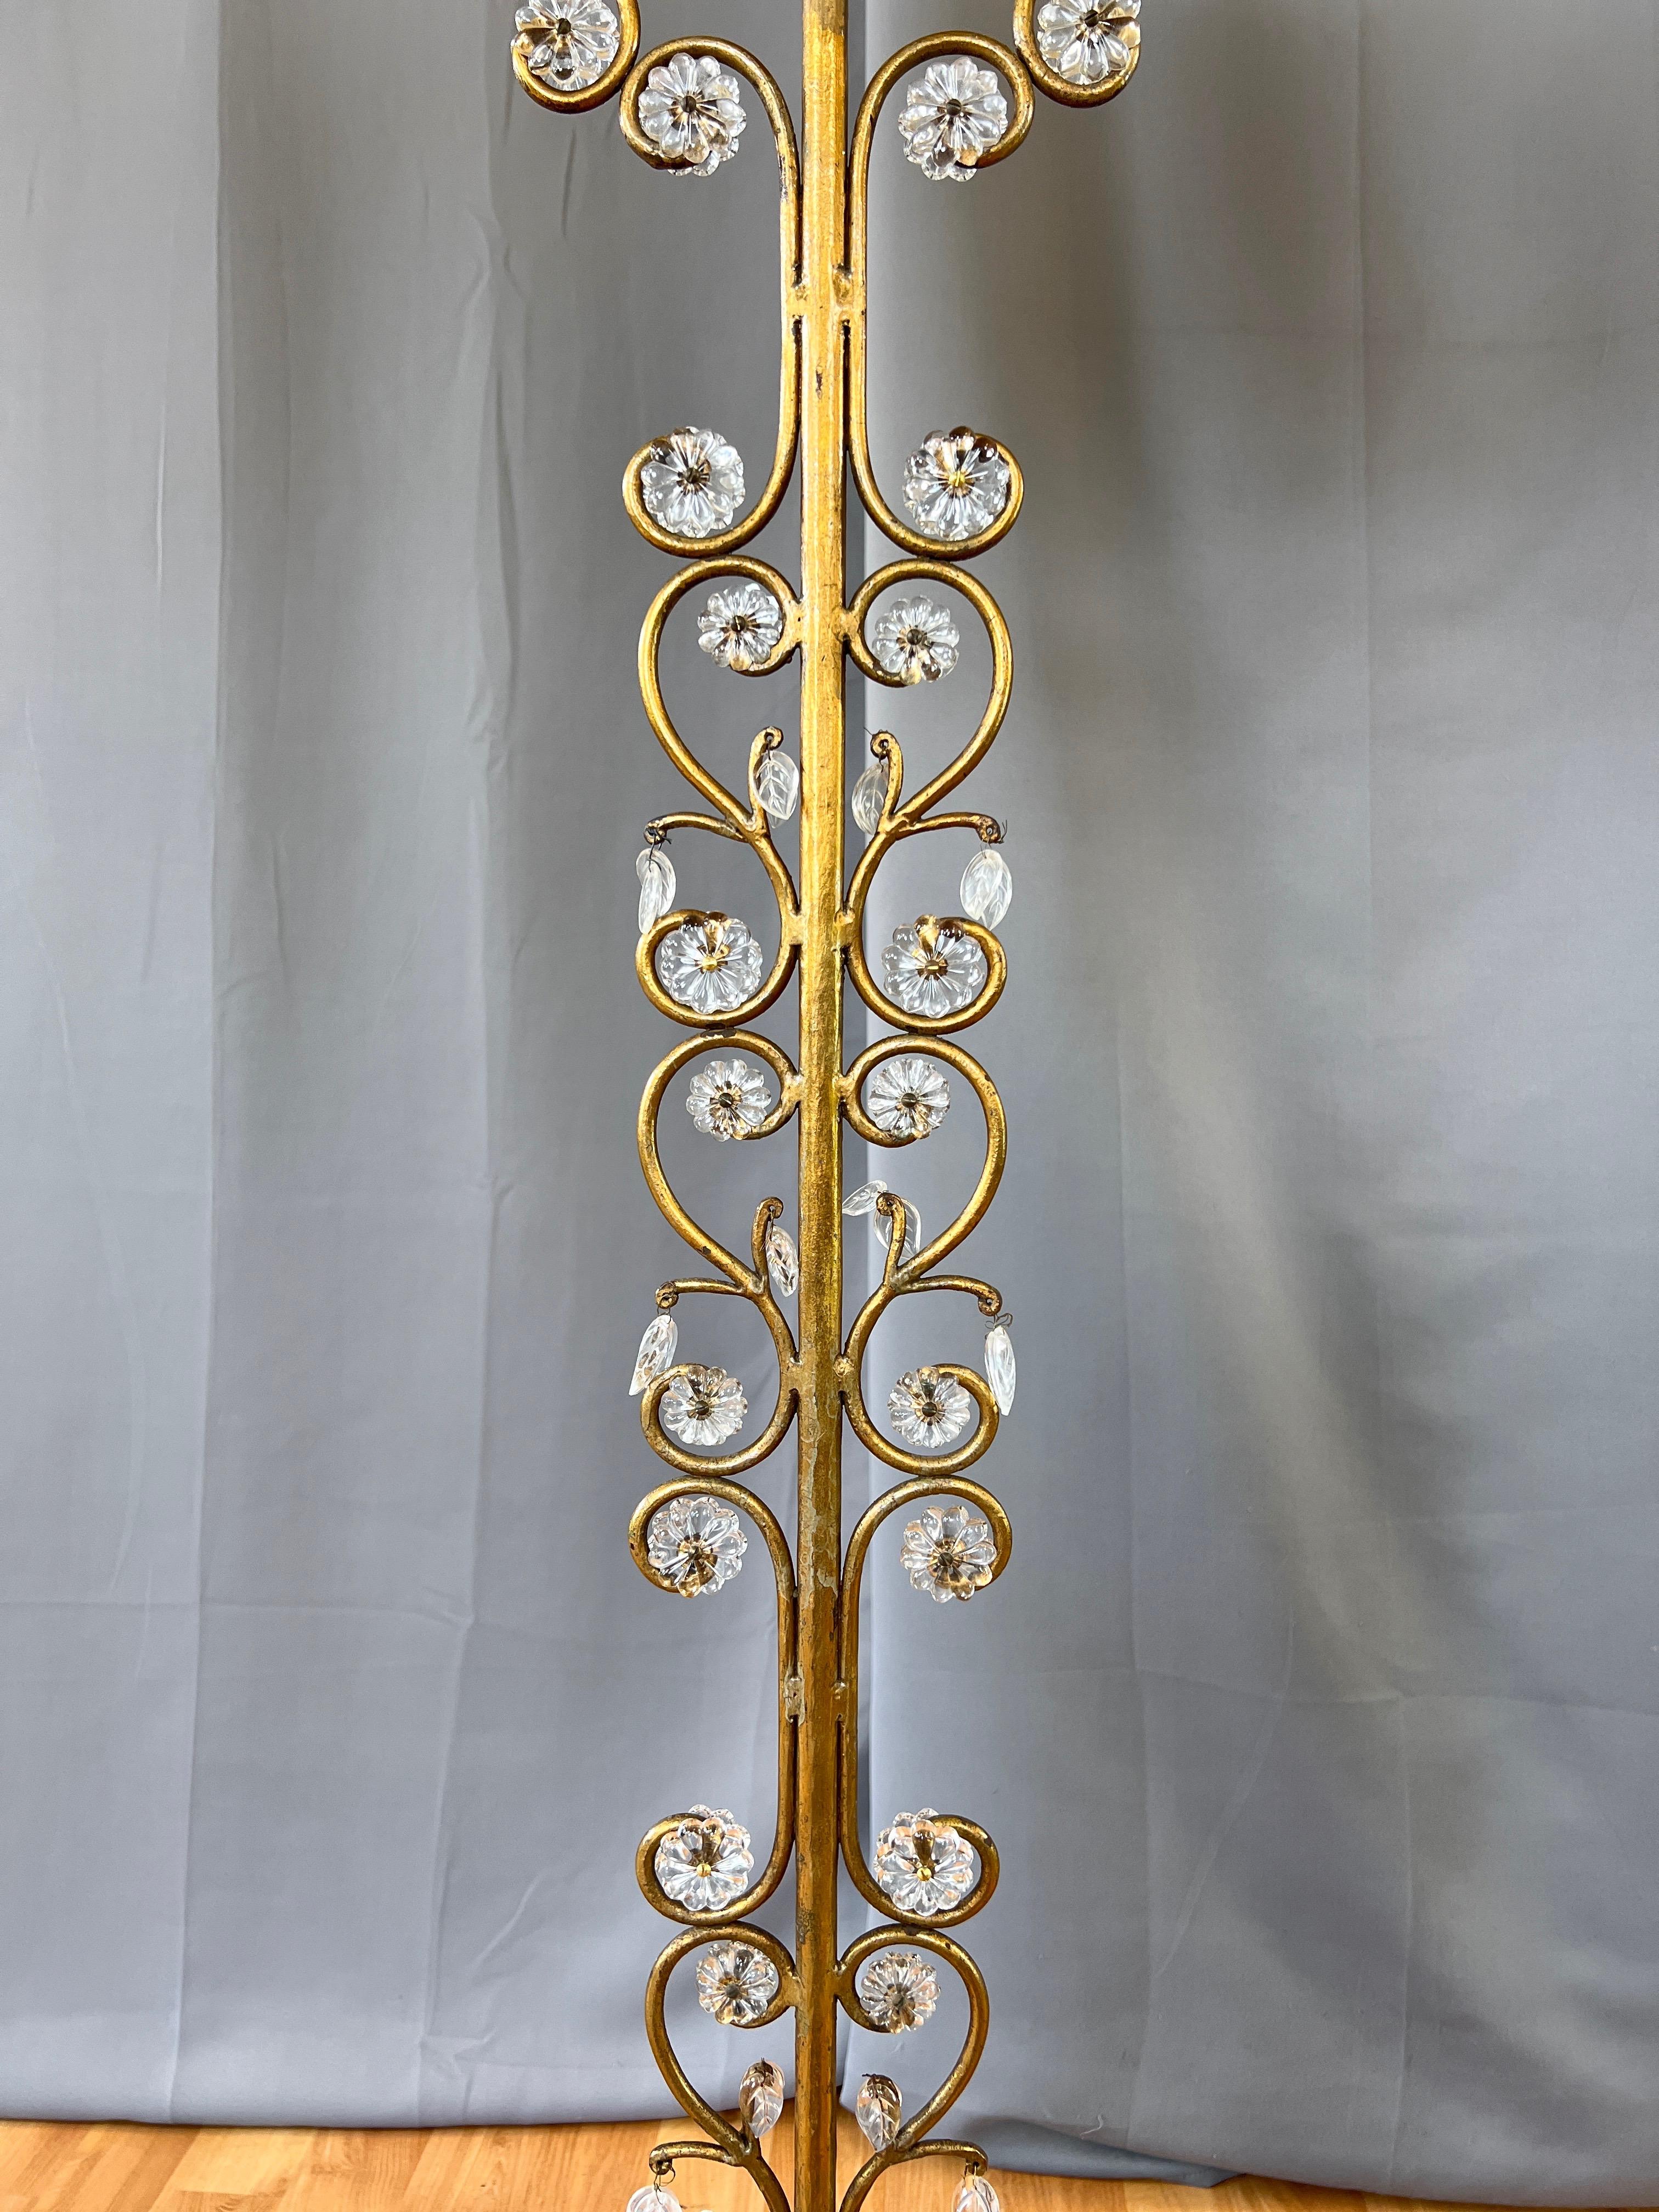 Pair of Italian Gilt Wrought Iron Floor Lamps with Glass Florets & Leaves, 1950s For Sale 1